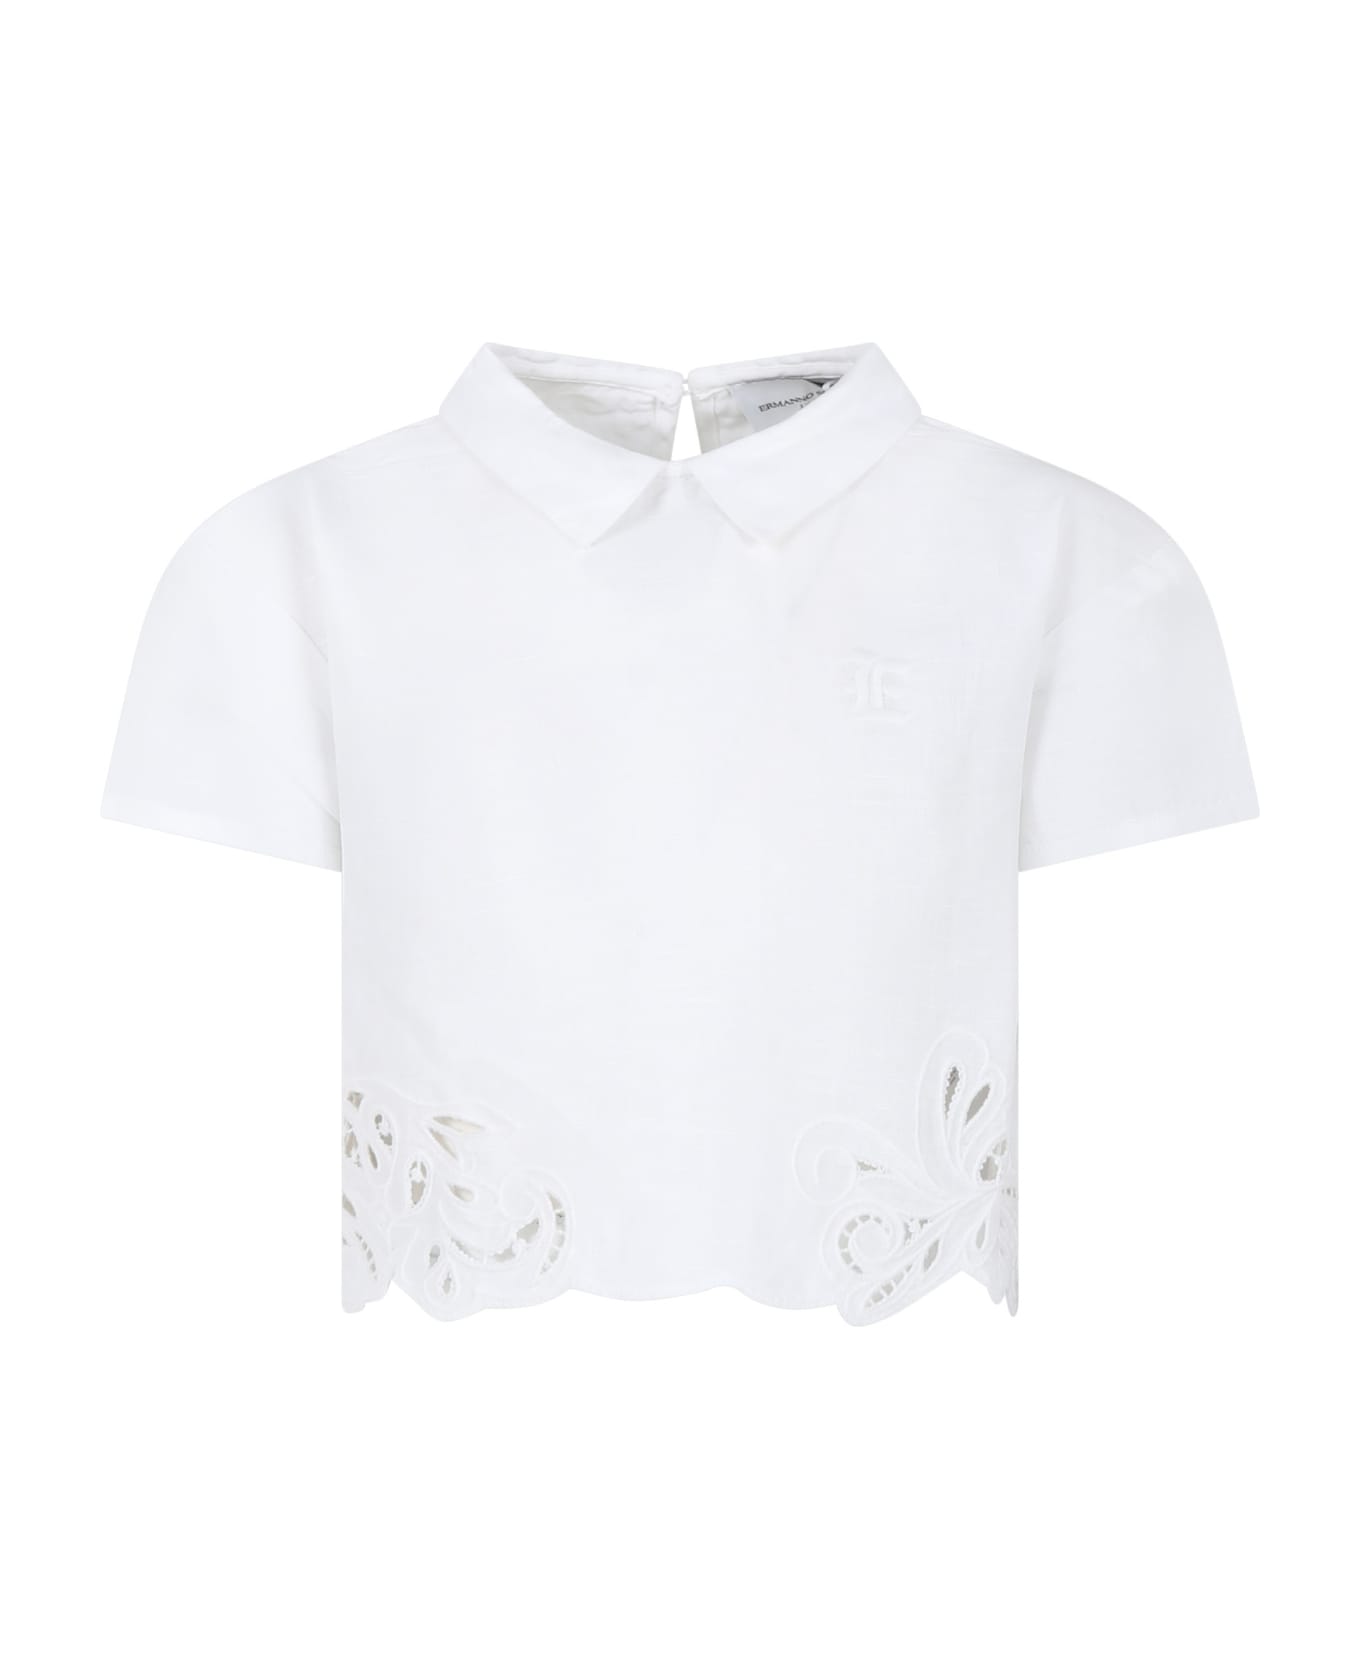 Ermanno Scervino Junior White Top For Girl With Embroidery - White